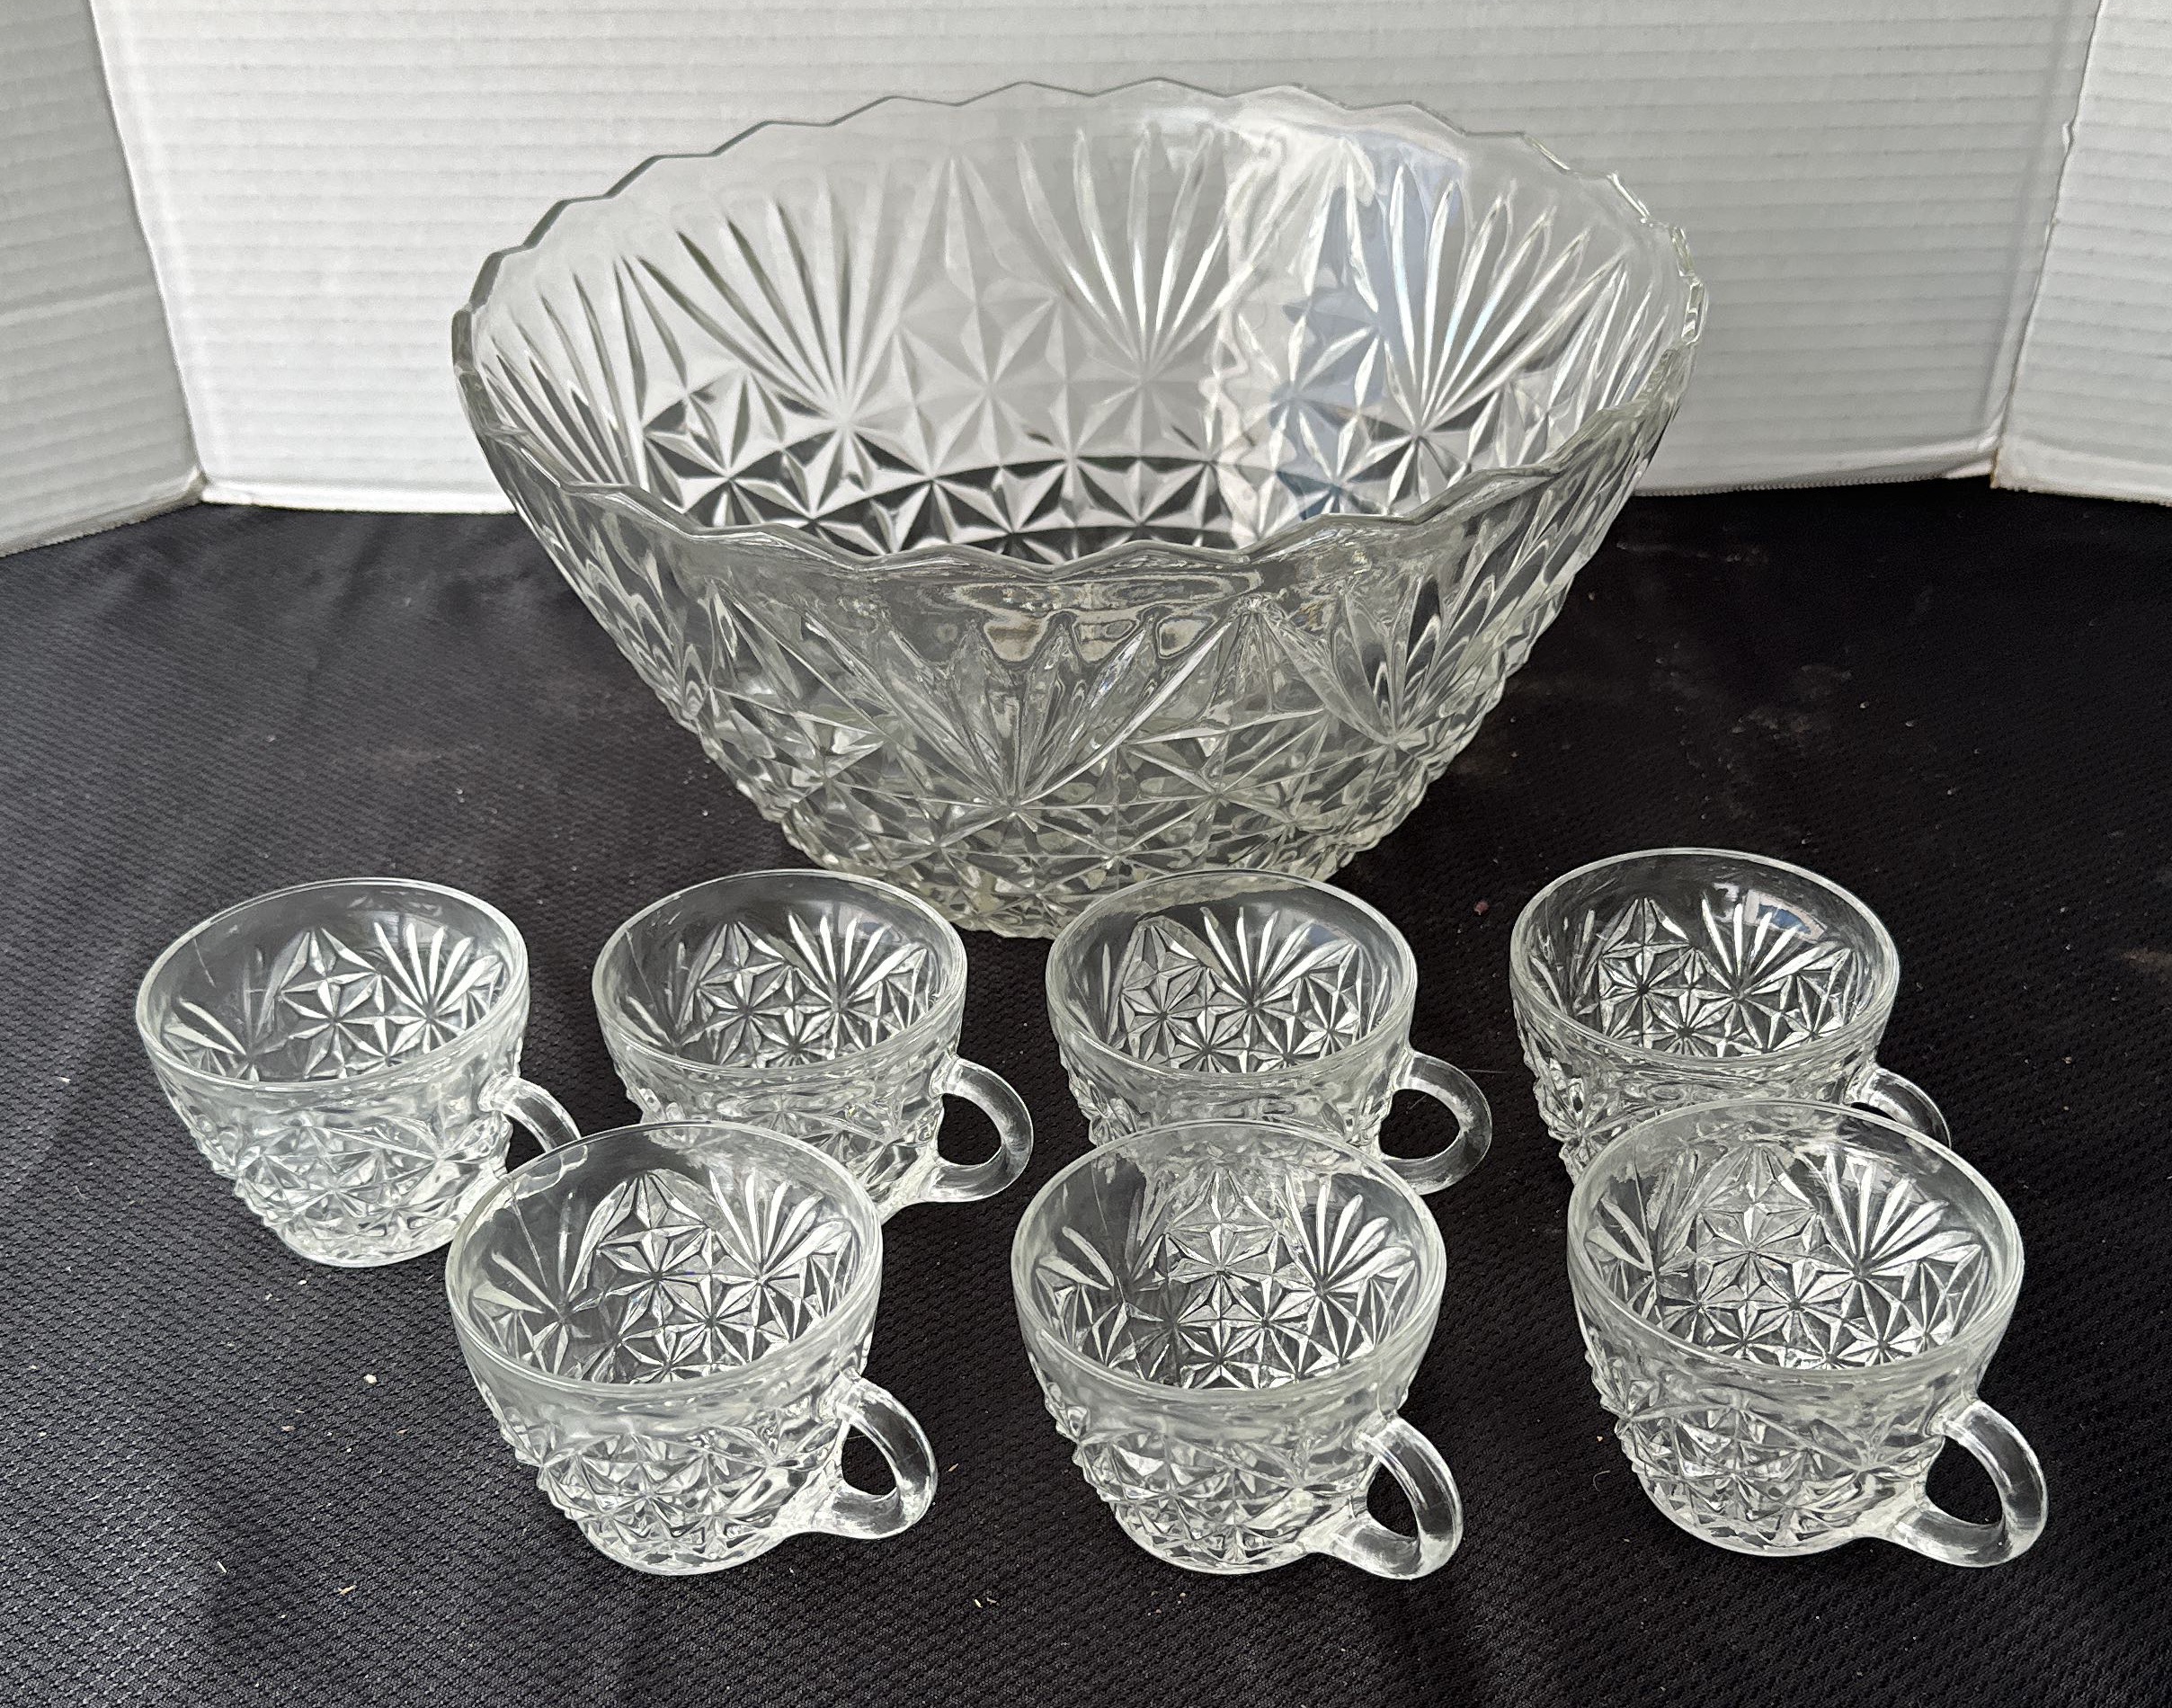 Sold at Auction: Vintage Pyrex Glass Measuring Cup, 4 Cups, One Quart 32 oz.